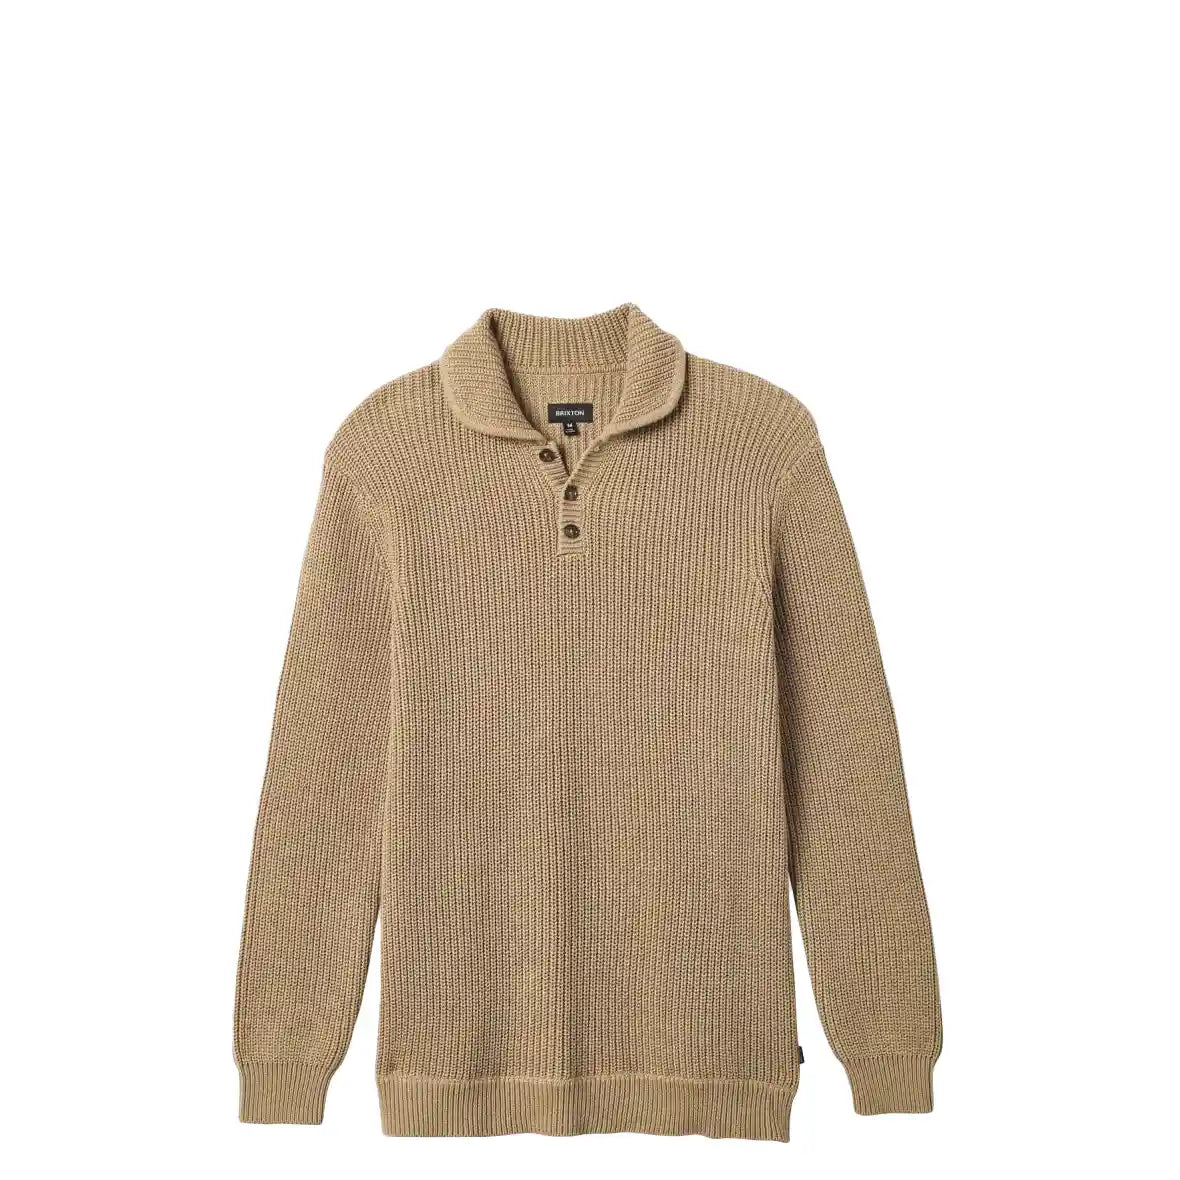 Brixton Not Your Dad's Fisherman Sweater, oatmeal, 22555-oatml – Norwood